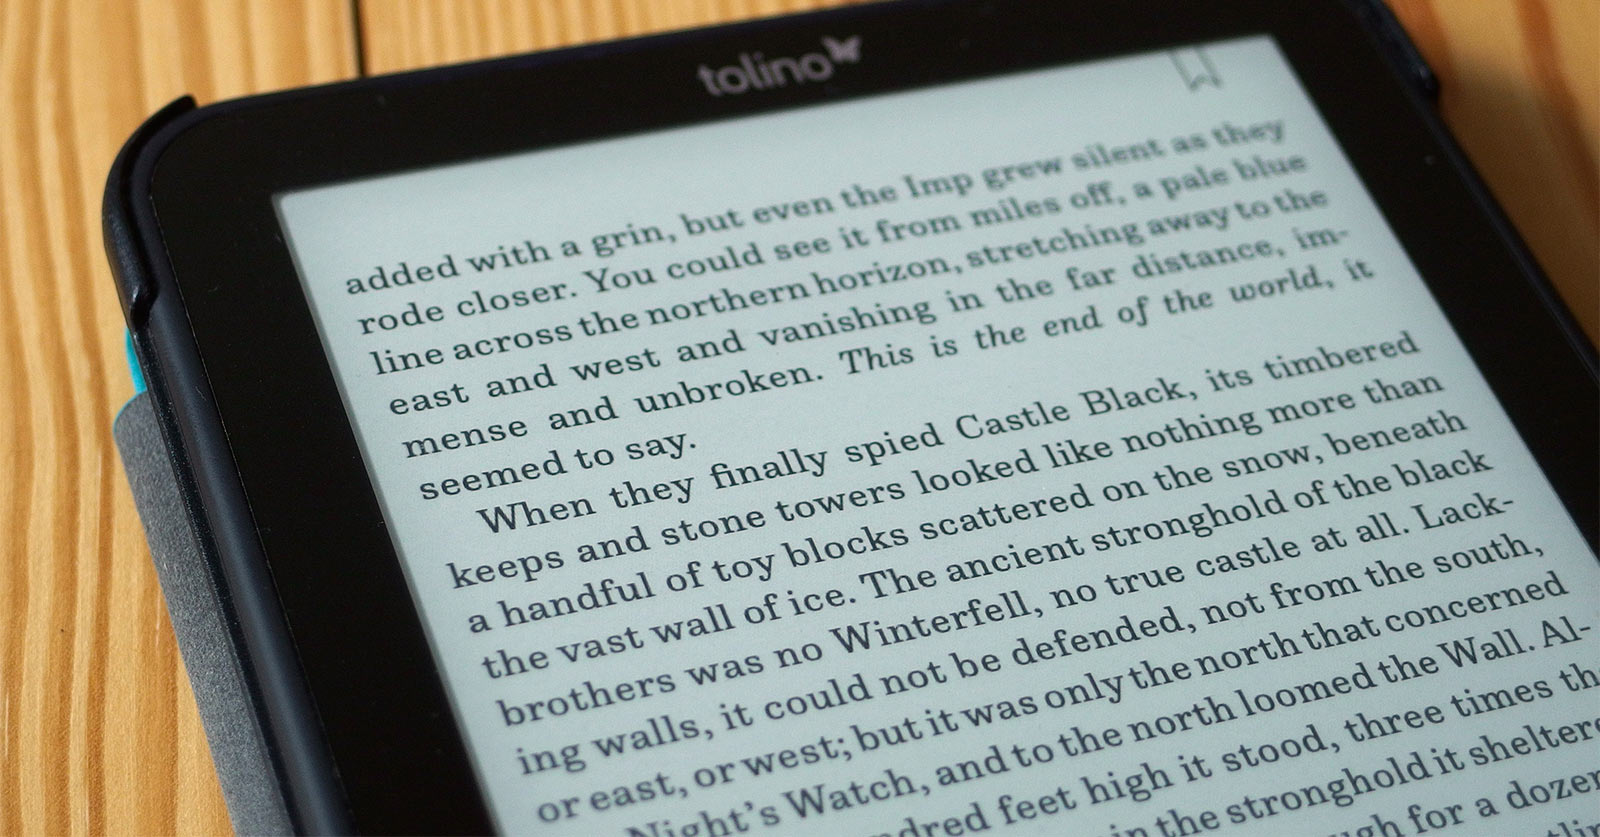 The Book weight performs well on an e-ink display. To assess the long-form reading experience, Jens read an entire book set in this weight on his e-book reader. Want to test it out yourself? The eBook is free on [FontFont.com](https://www.fontfont.com/staticcontent/downloads/The_Haunter_of_the_Dark.epub?1442242564) or in the [iTunes store](https://itunes.apple.com/us/book/the-haunter-of-the-dark/id1035171798?l=de&ls=1&mt=11)